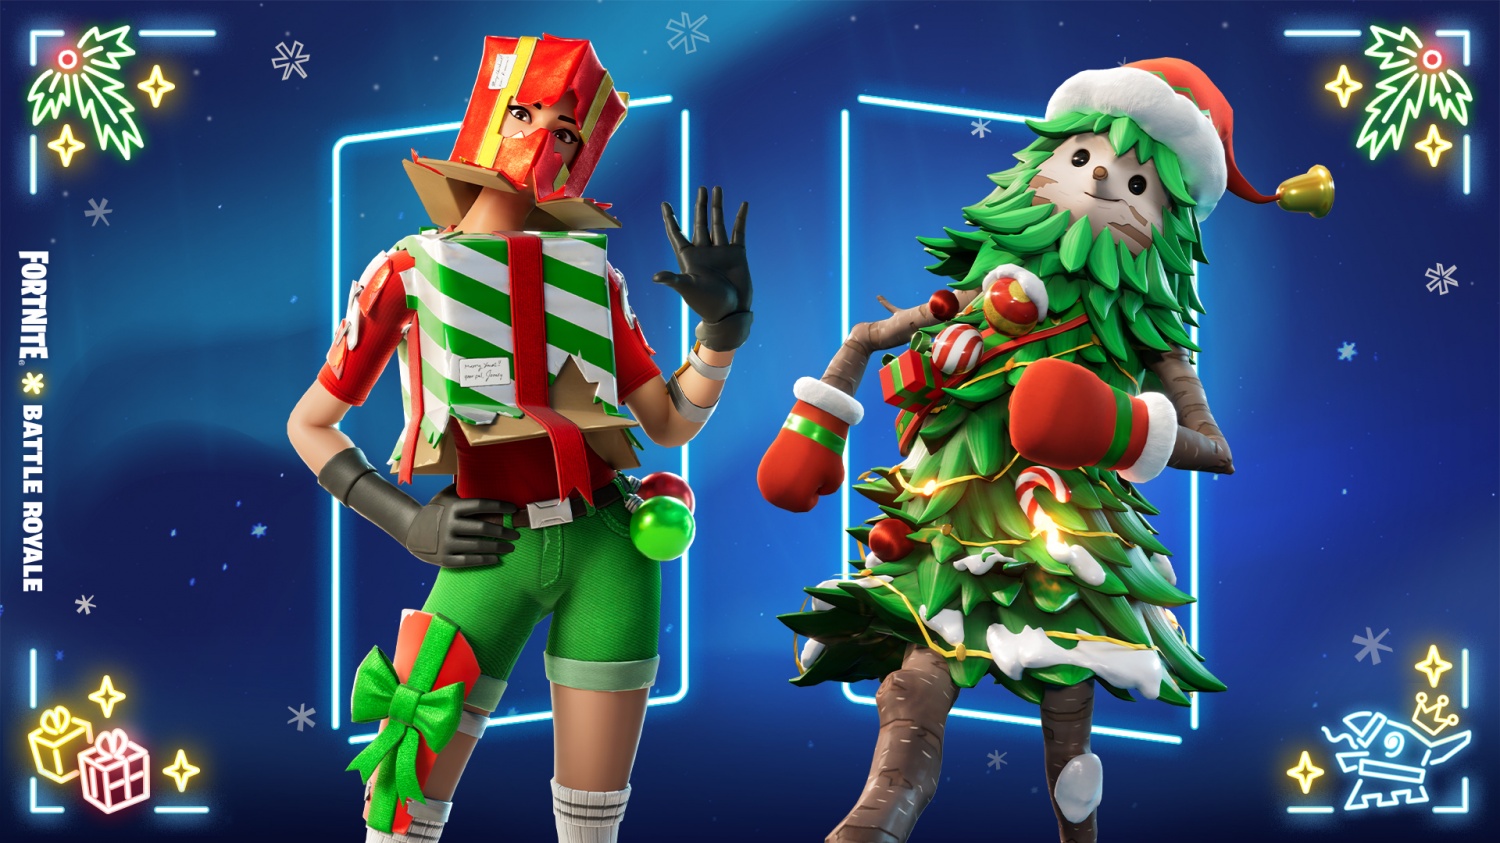 Fortnite Free Winterfest Skin Giveaway What is It and Until When is It